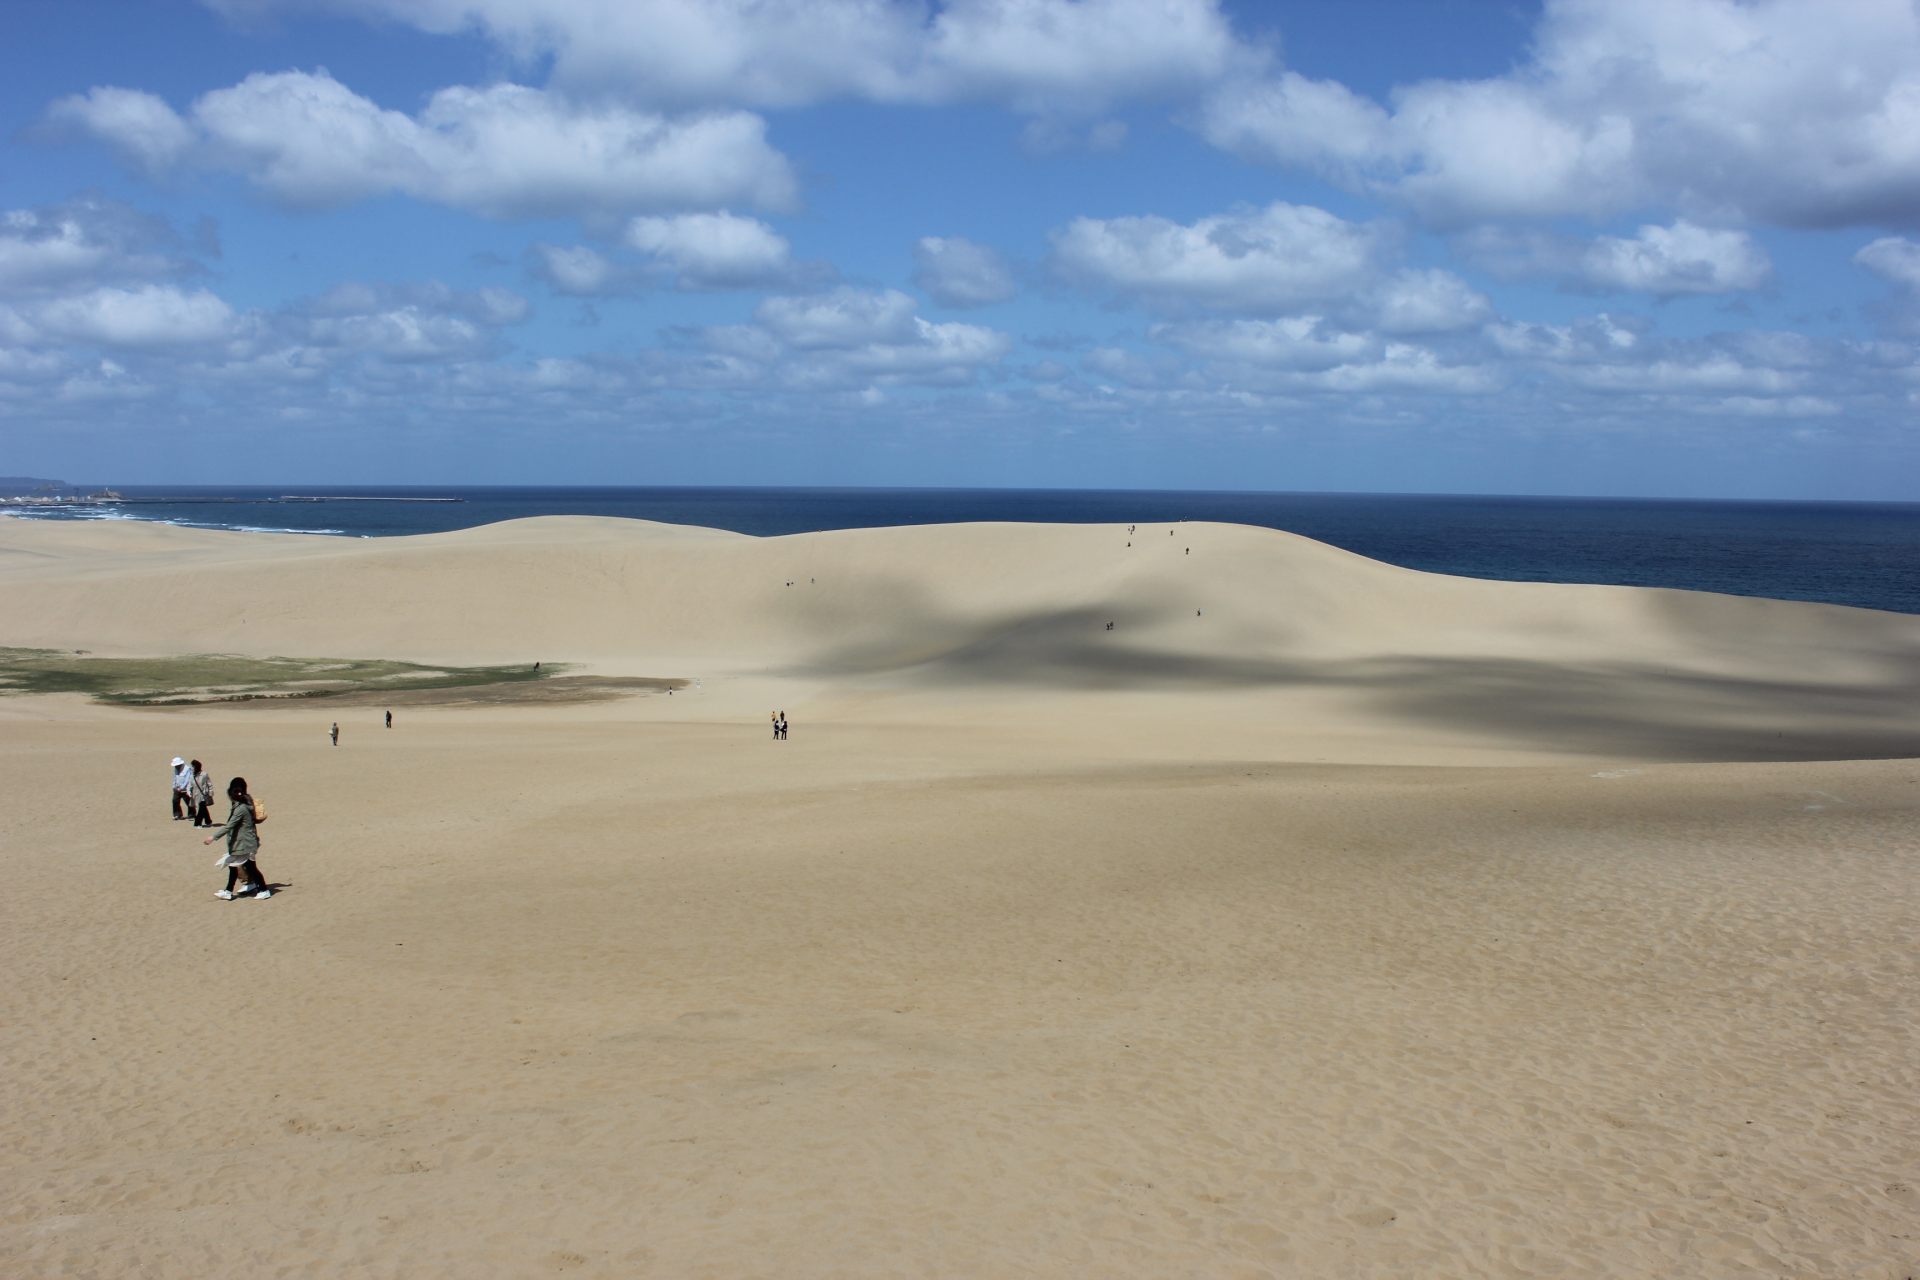 Stop by at the visitors Center on Tottori Sand Dunes and see displays on sand dunes and the geopark. A guide is always there as well.
(Photo provided by Natural Park Foundation Tottori Branch)
